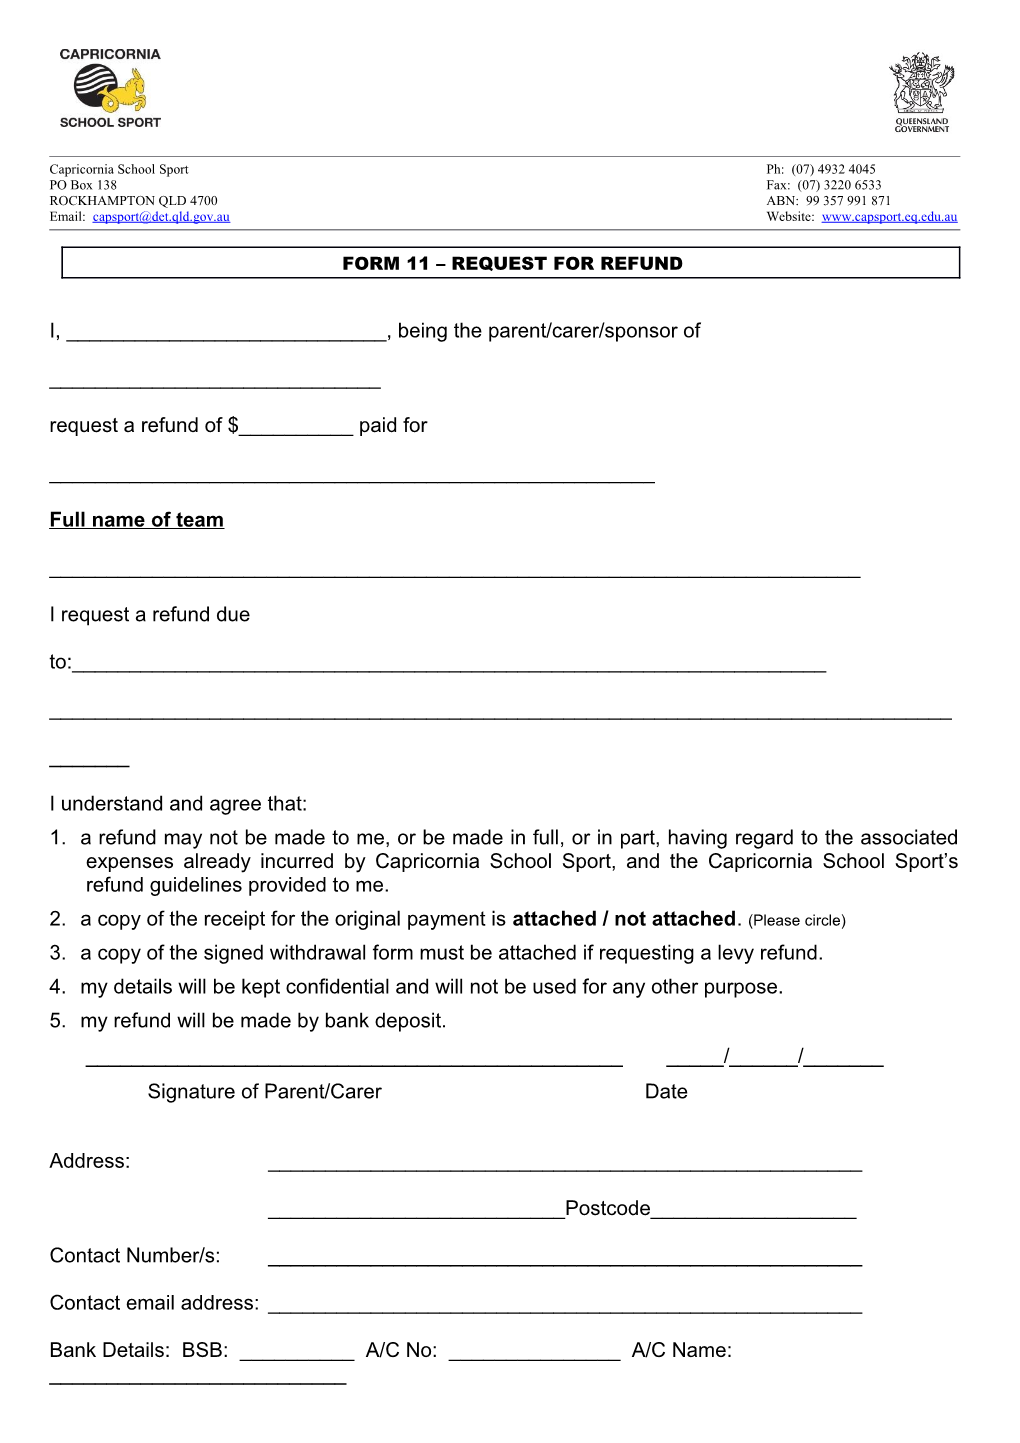 Request for Refund - to Receive a Refund This Form Must Be Completed and Sent to the Sport